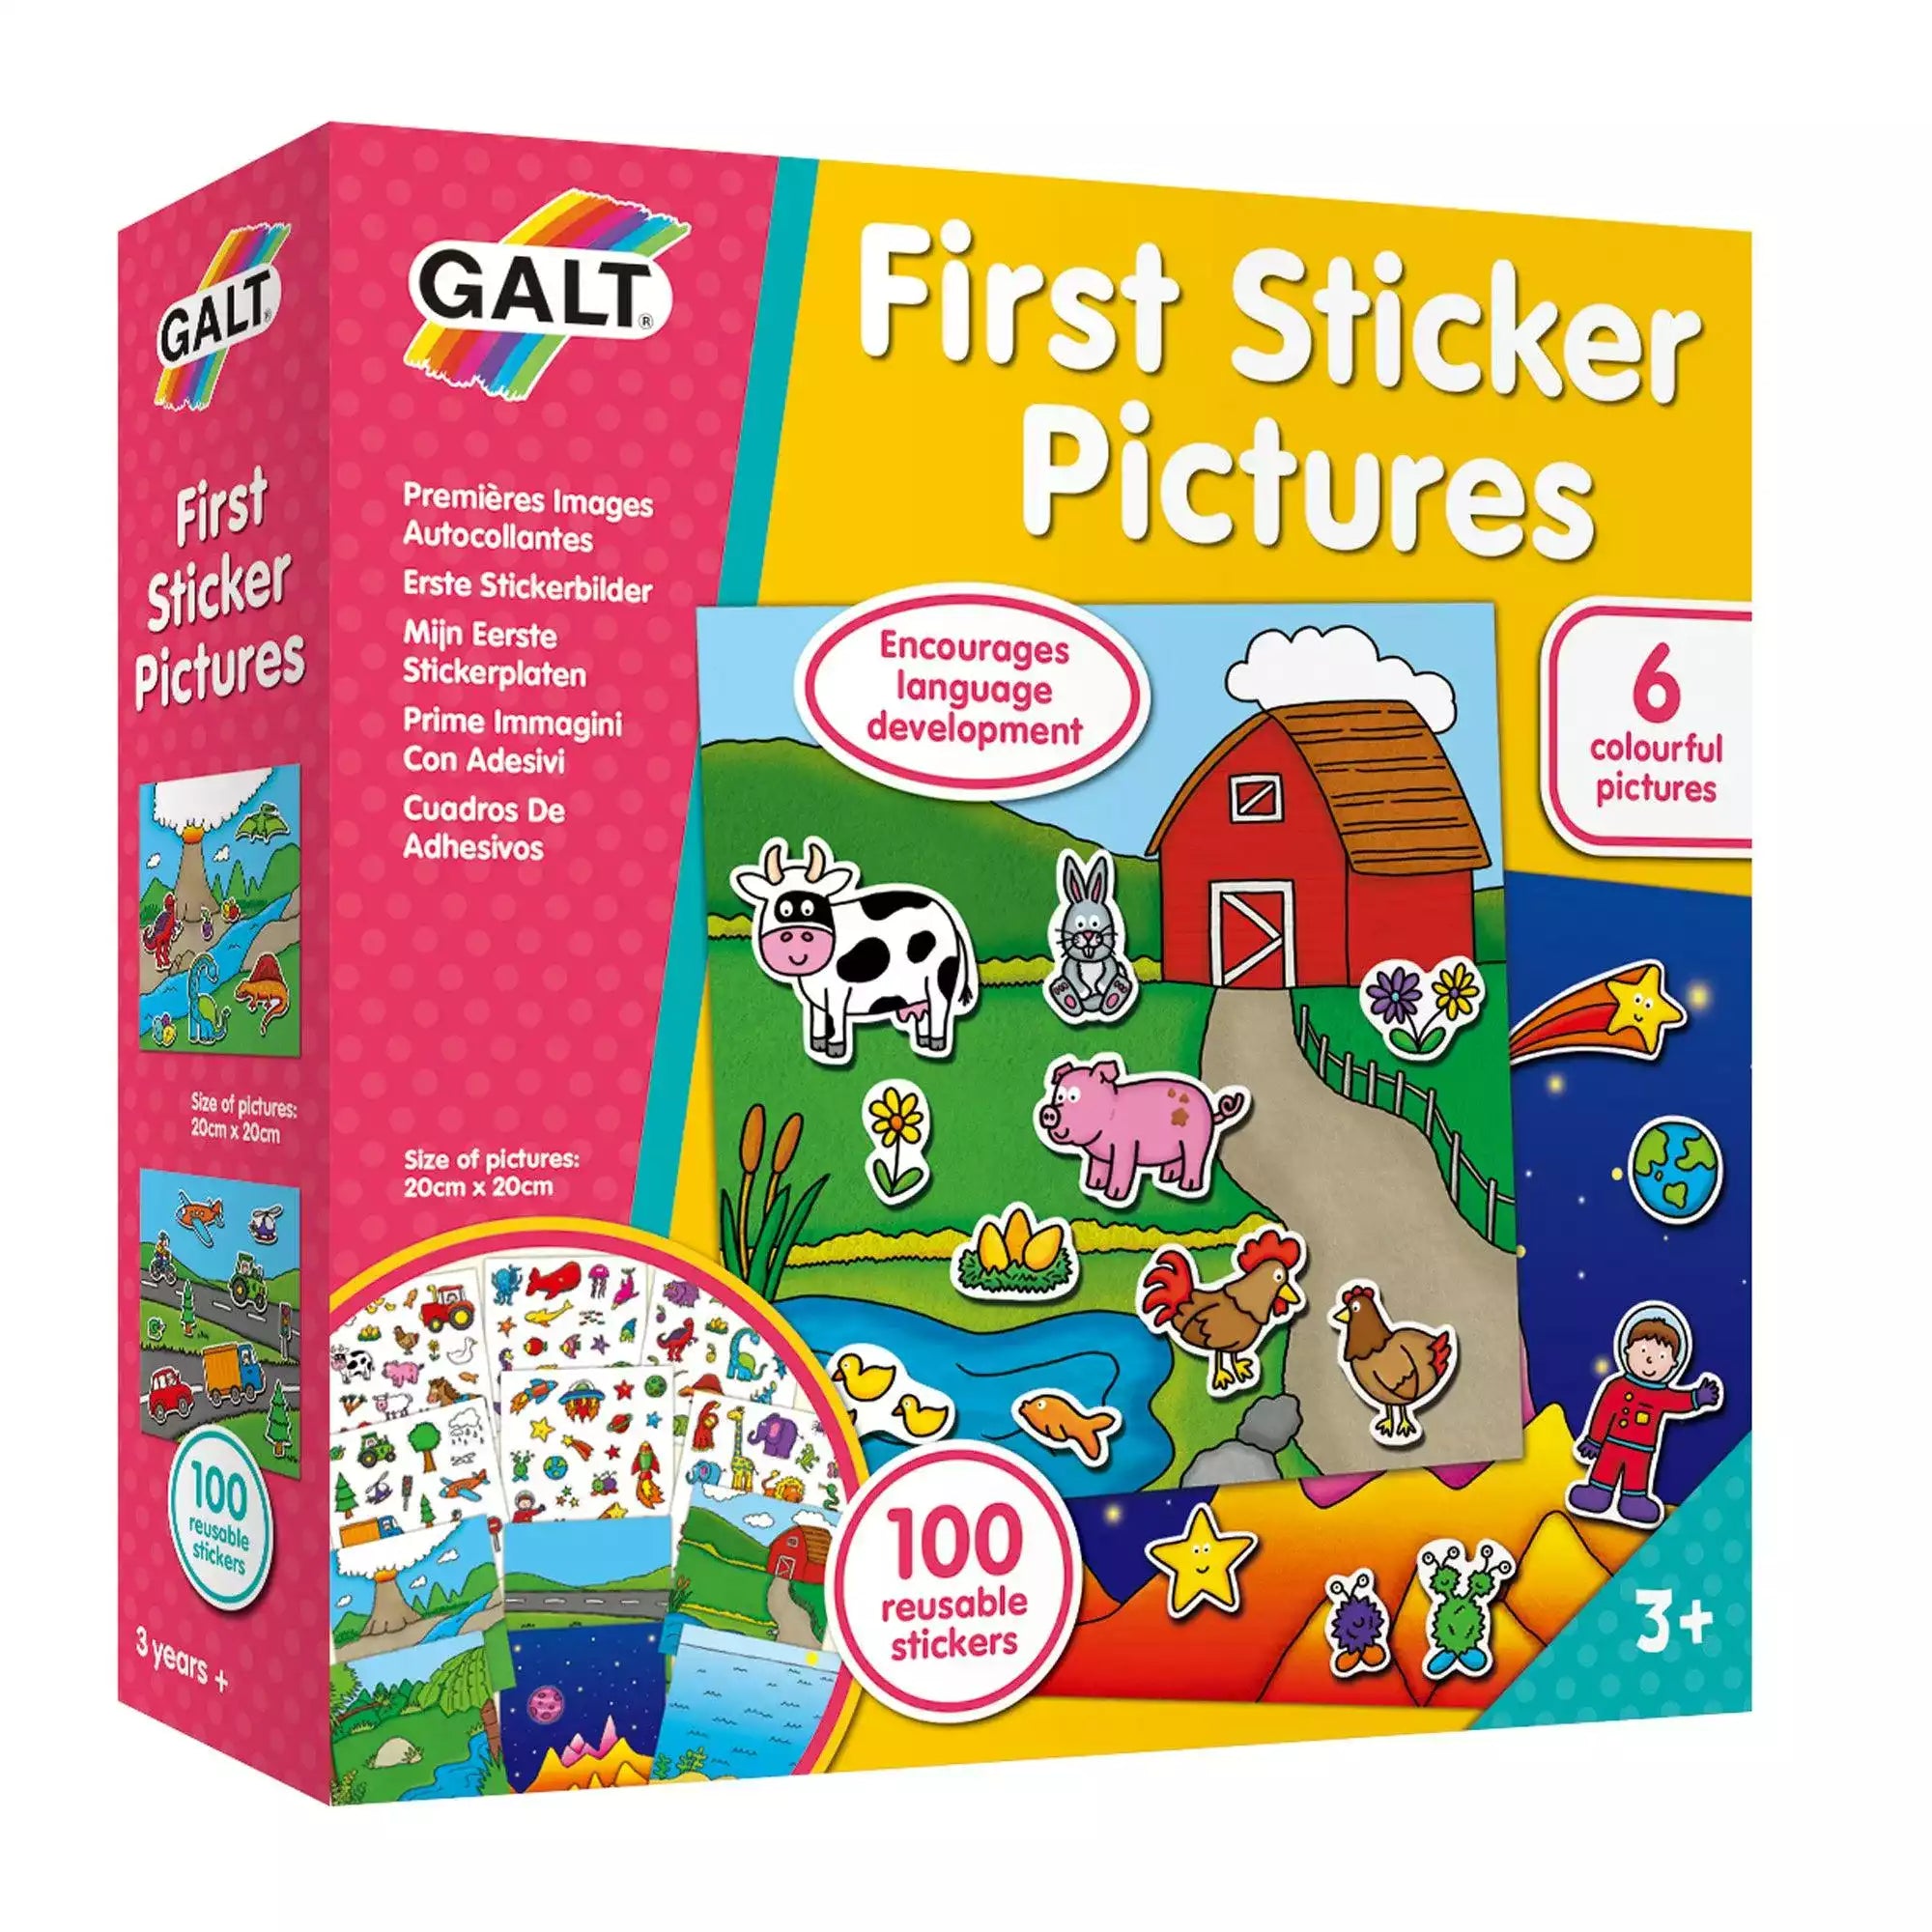 buy sticker pictures activity kit from galt toys - shop galt toy picture - activity kits